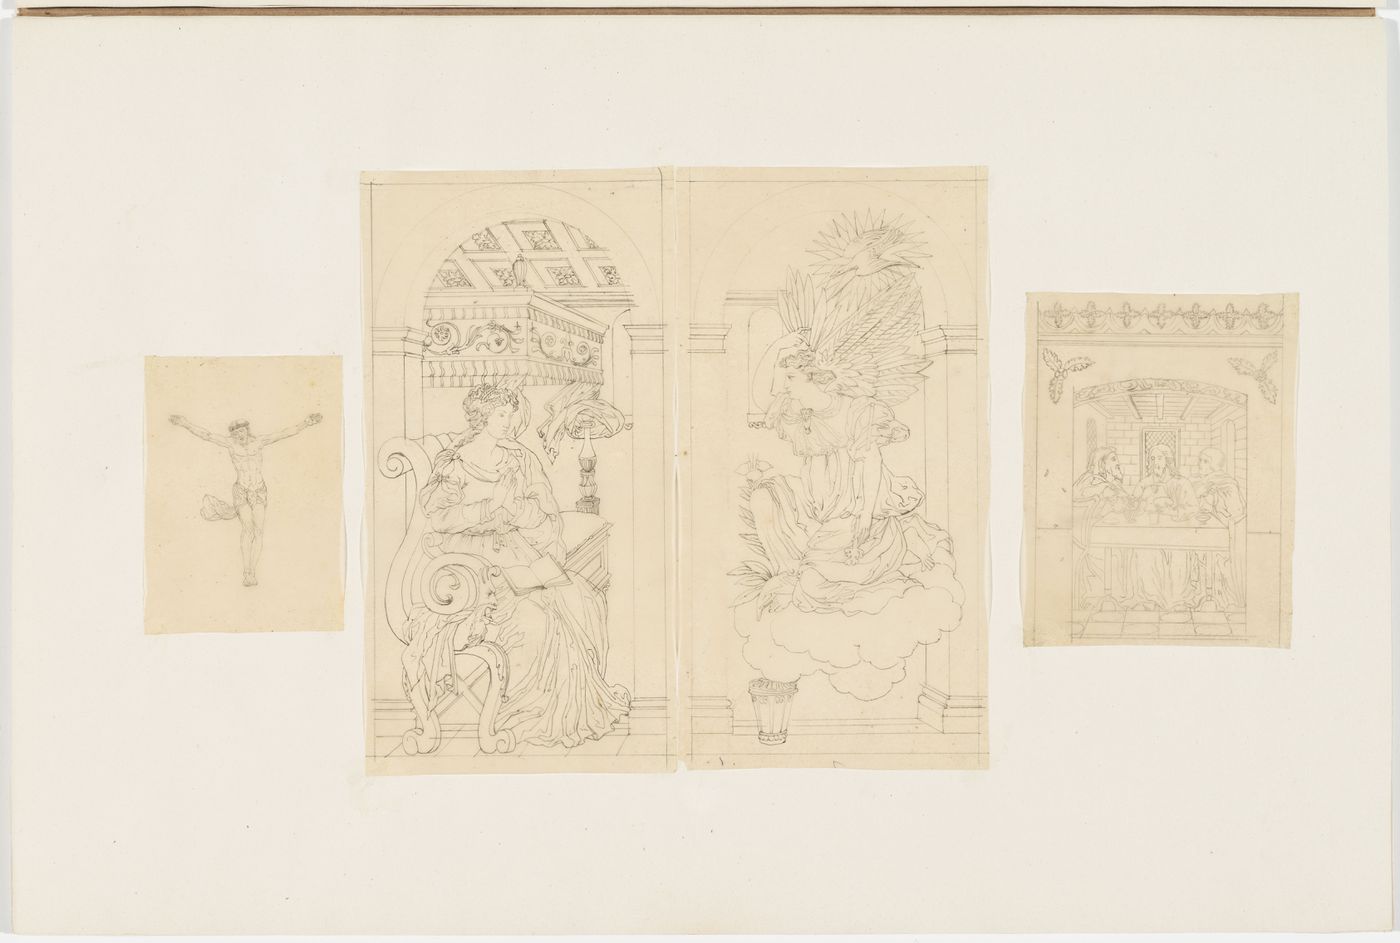 Drawings of religious imagery: A crucified Christ; an Annunciation; and an interior scene with Christ and his disciples